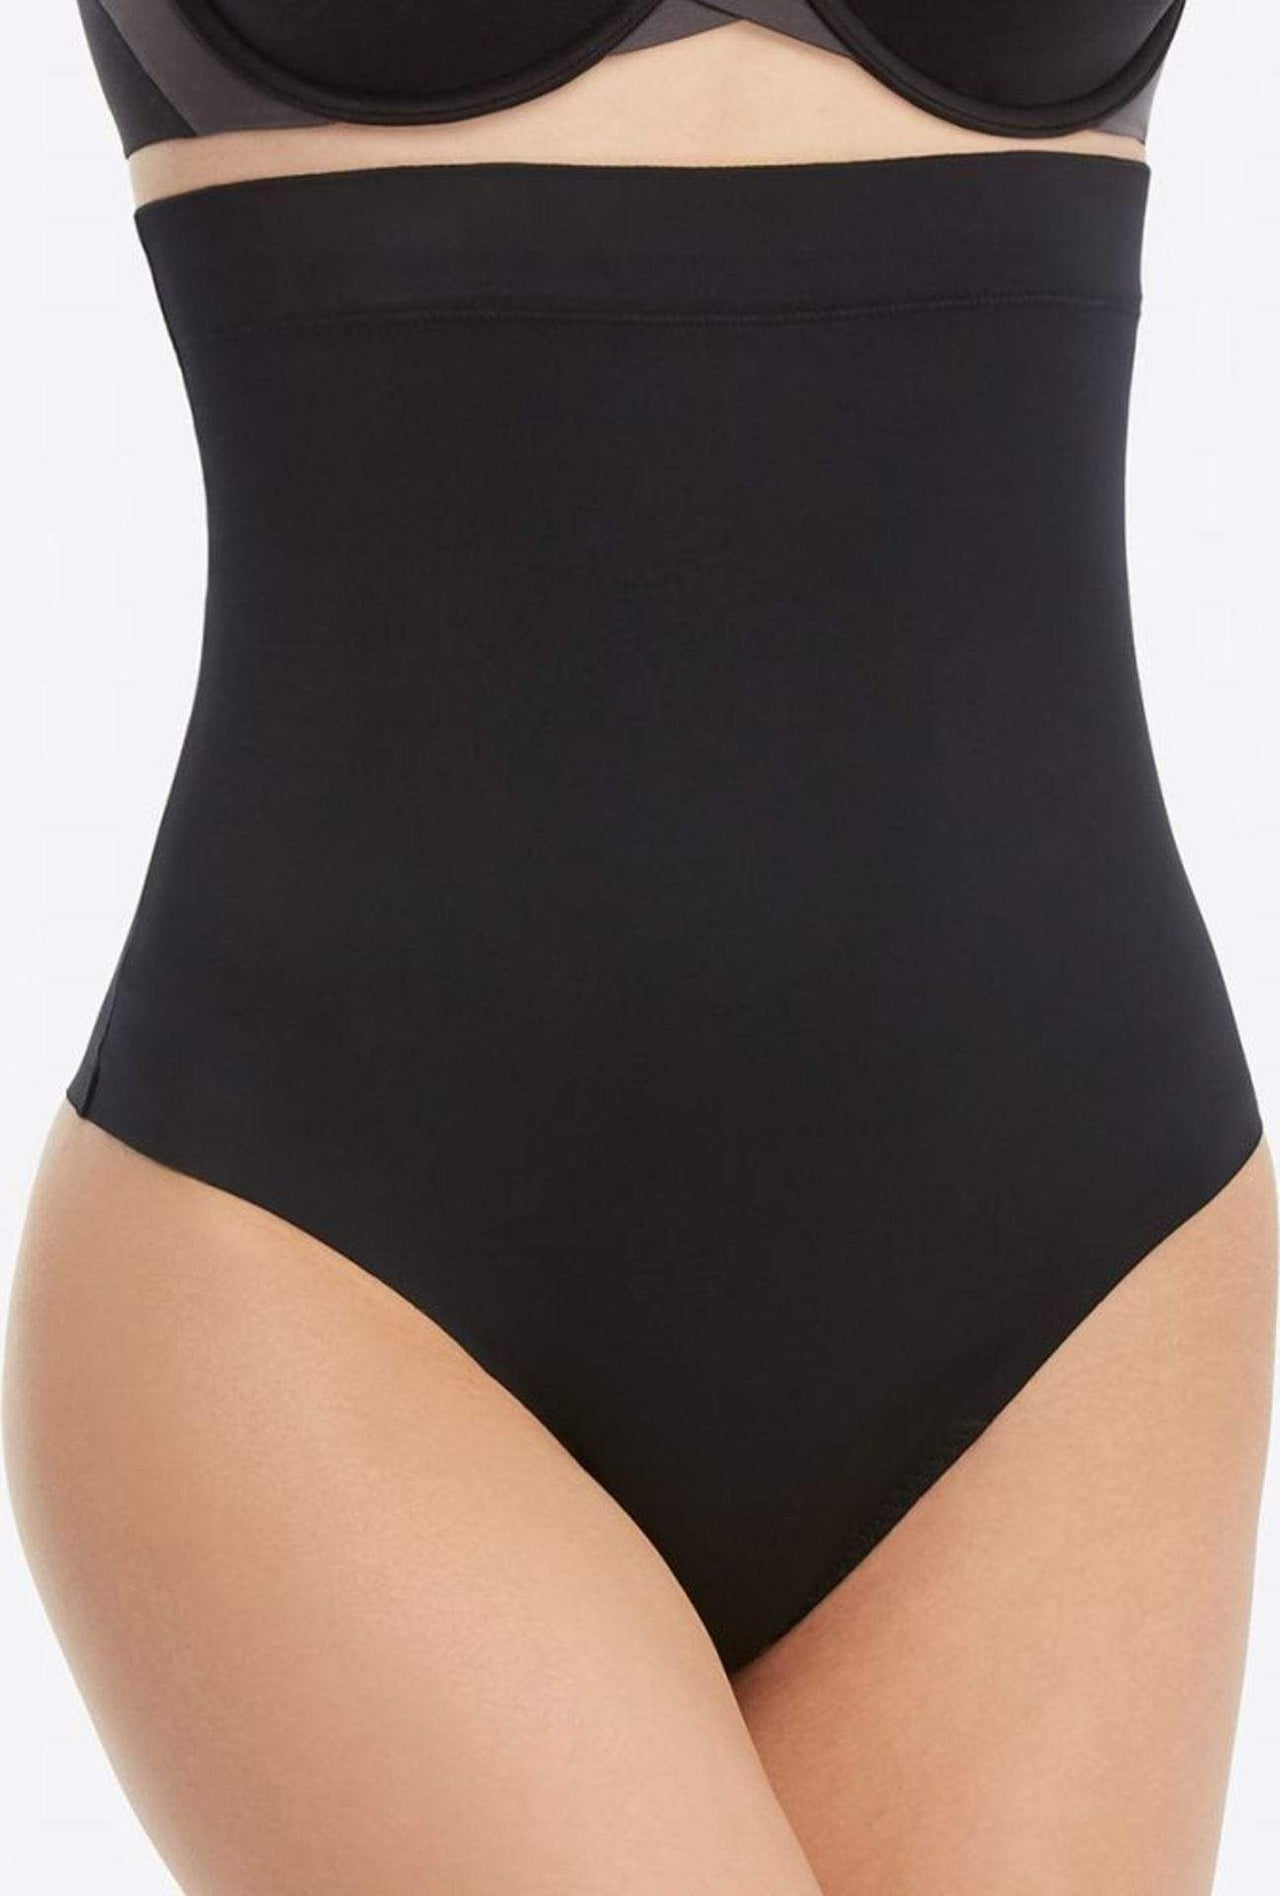 Suit Your Fancy High-Waisted Thong SPANX